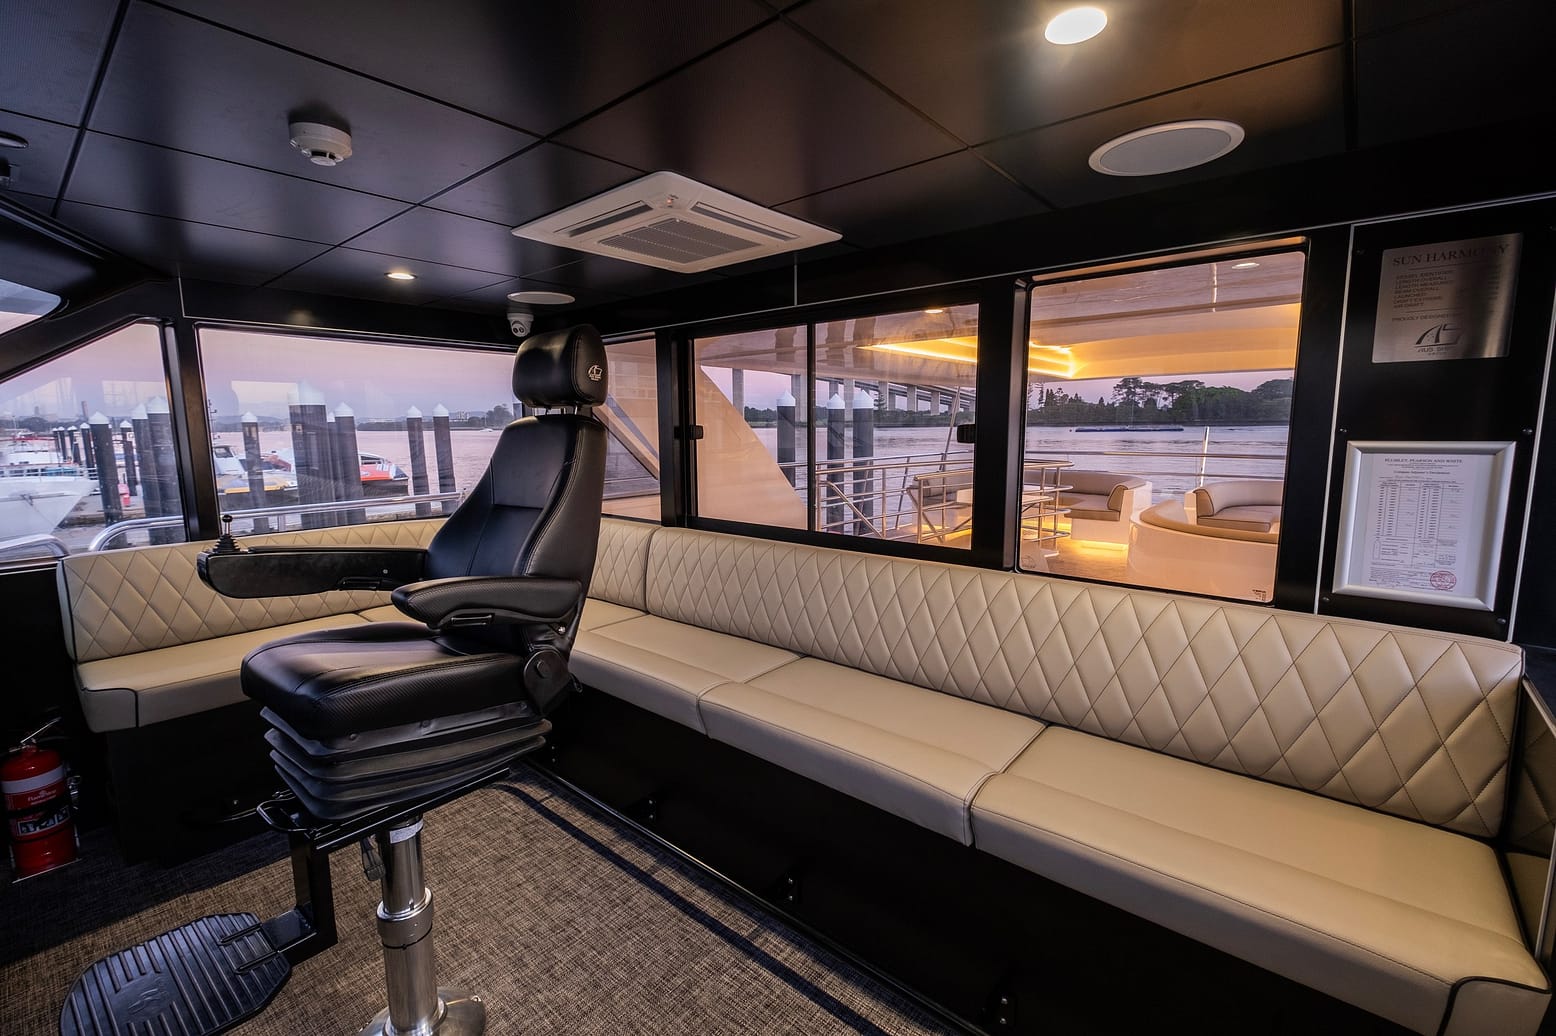 luxury boat interior with lighting under the seats